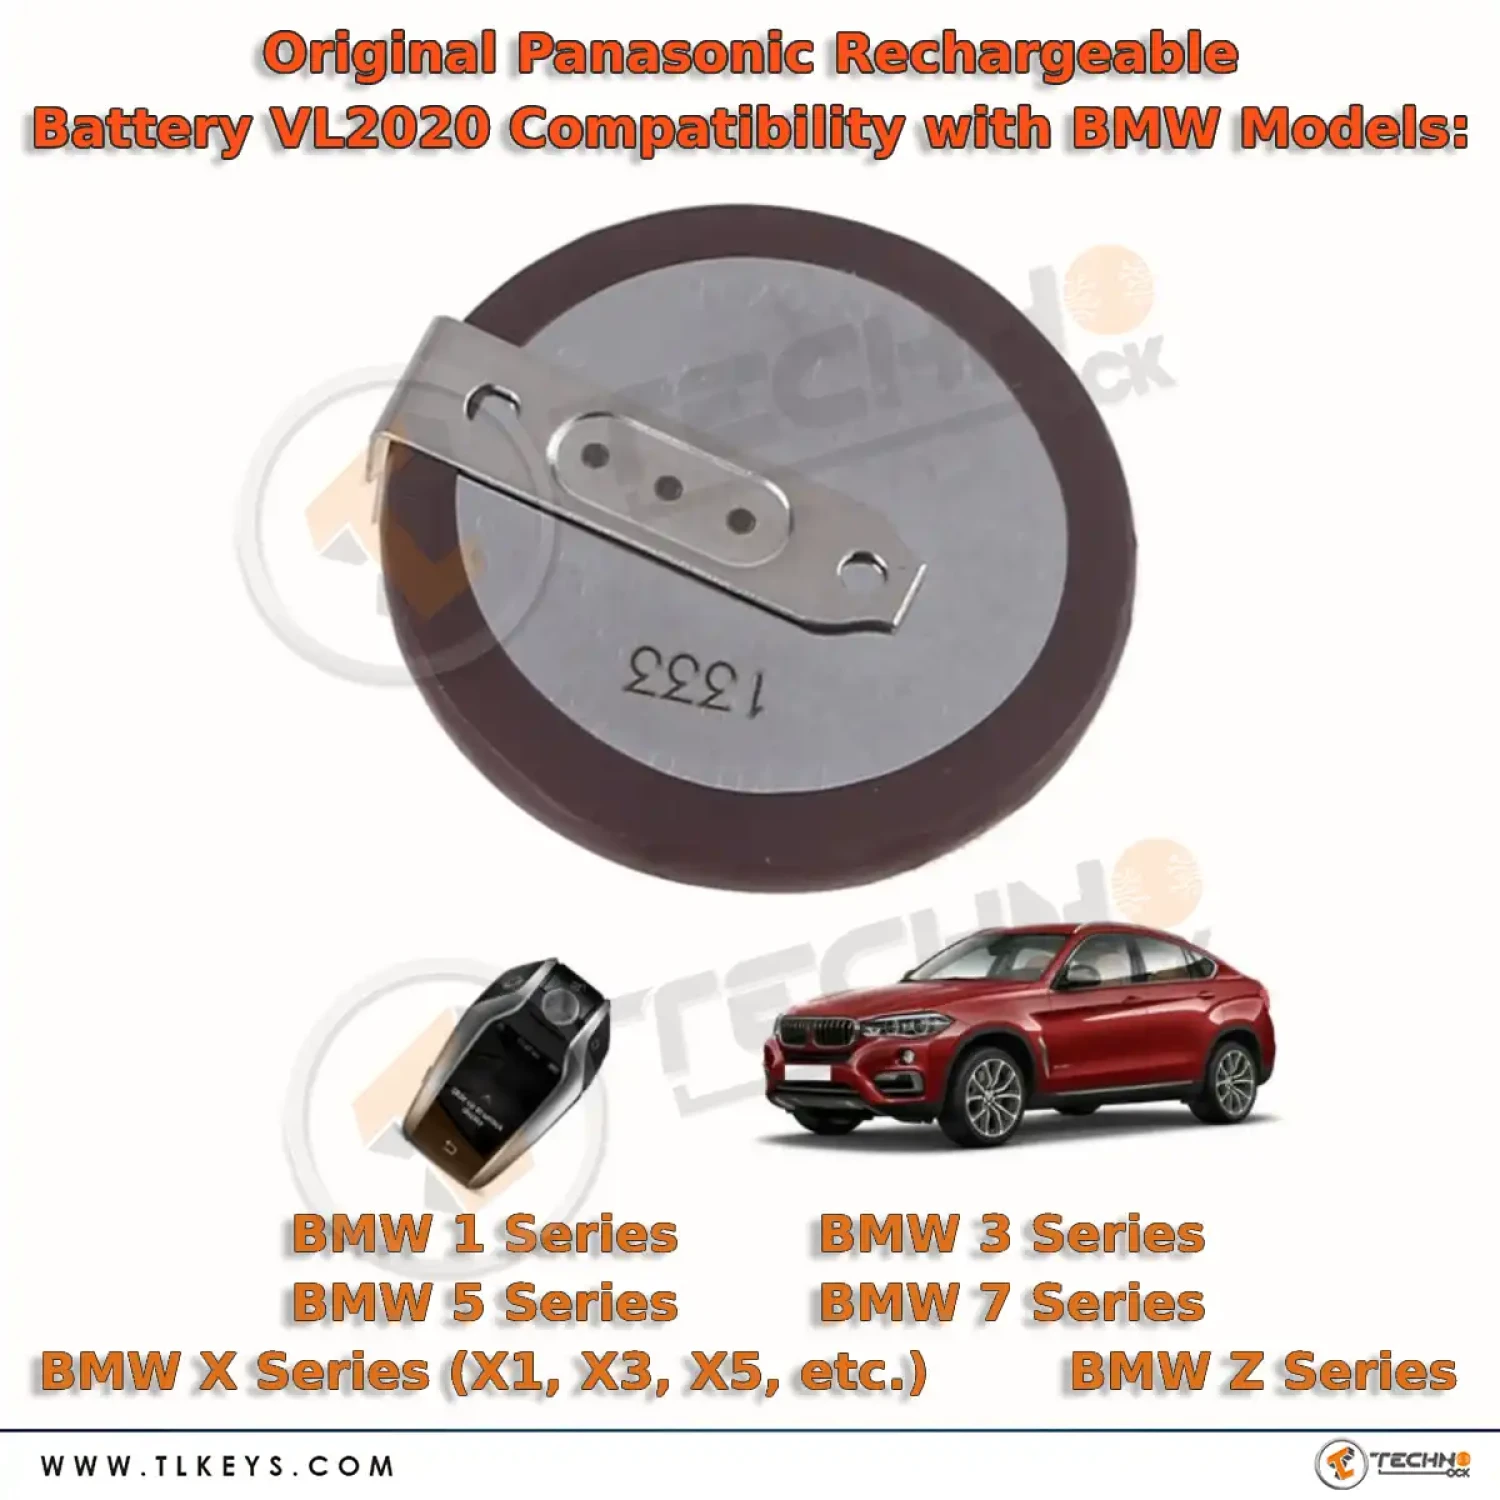 Elevate the Performance of Your BMW Key Fob with the Genuine Panasonic VL2020 Rechargeable Battery